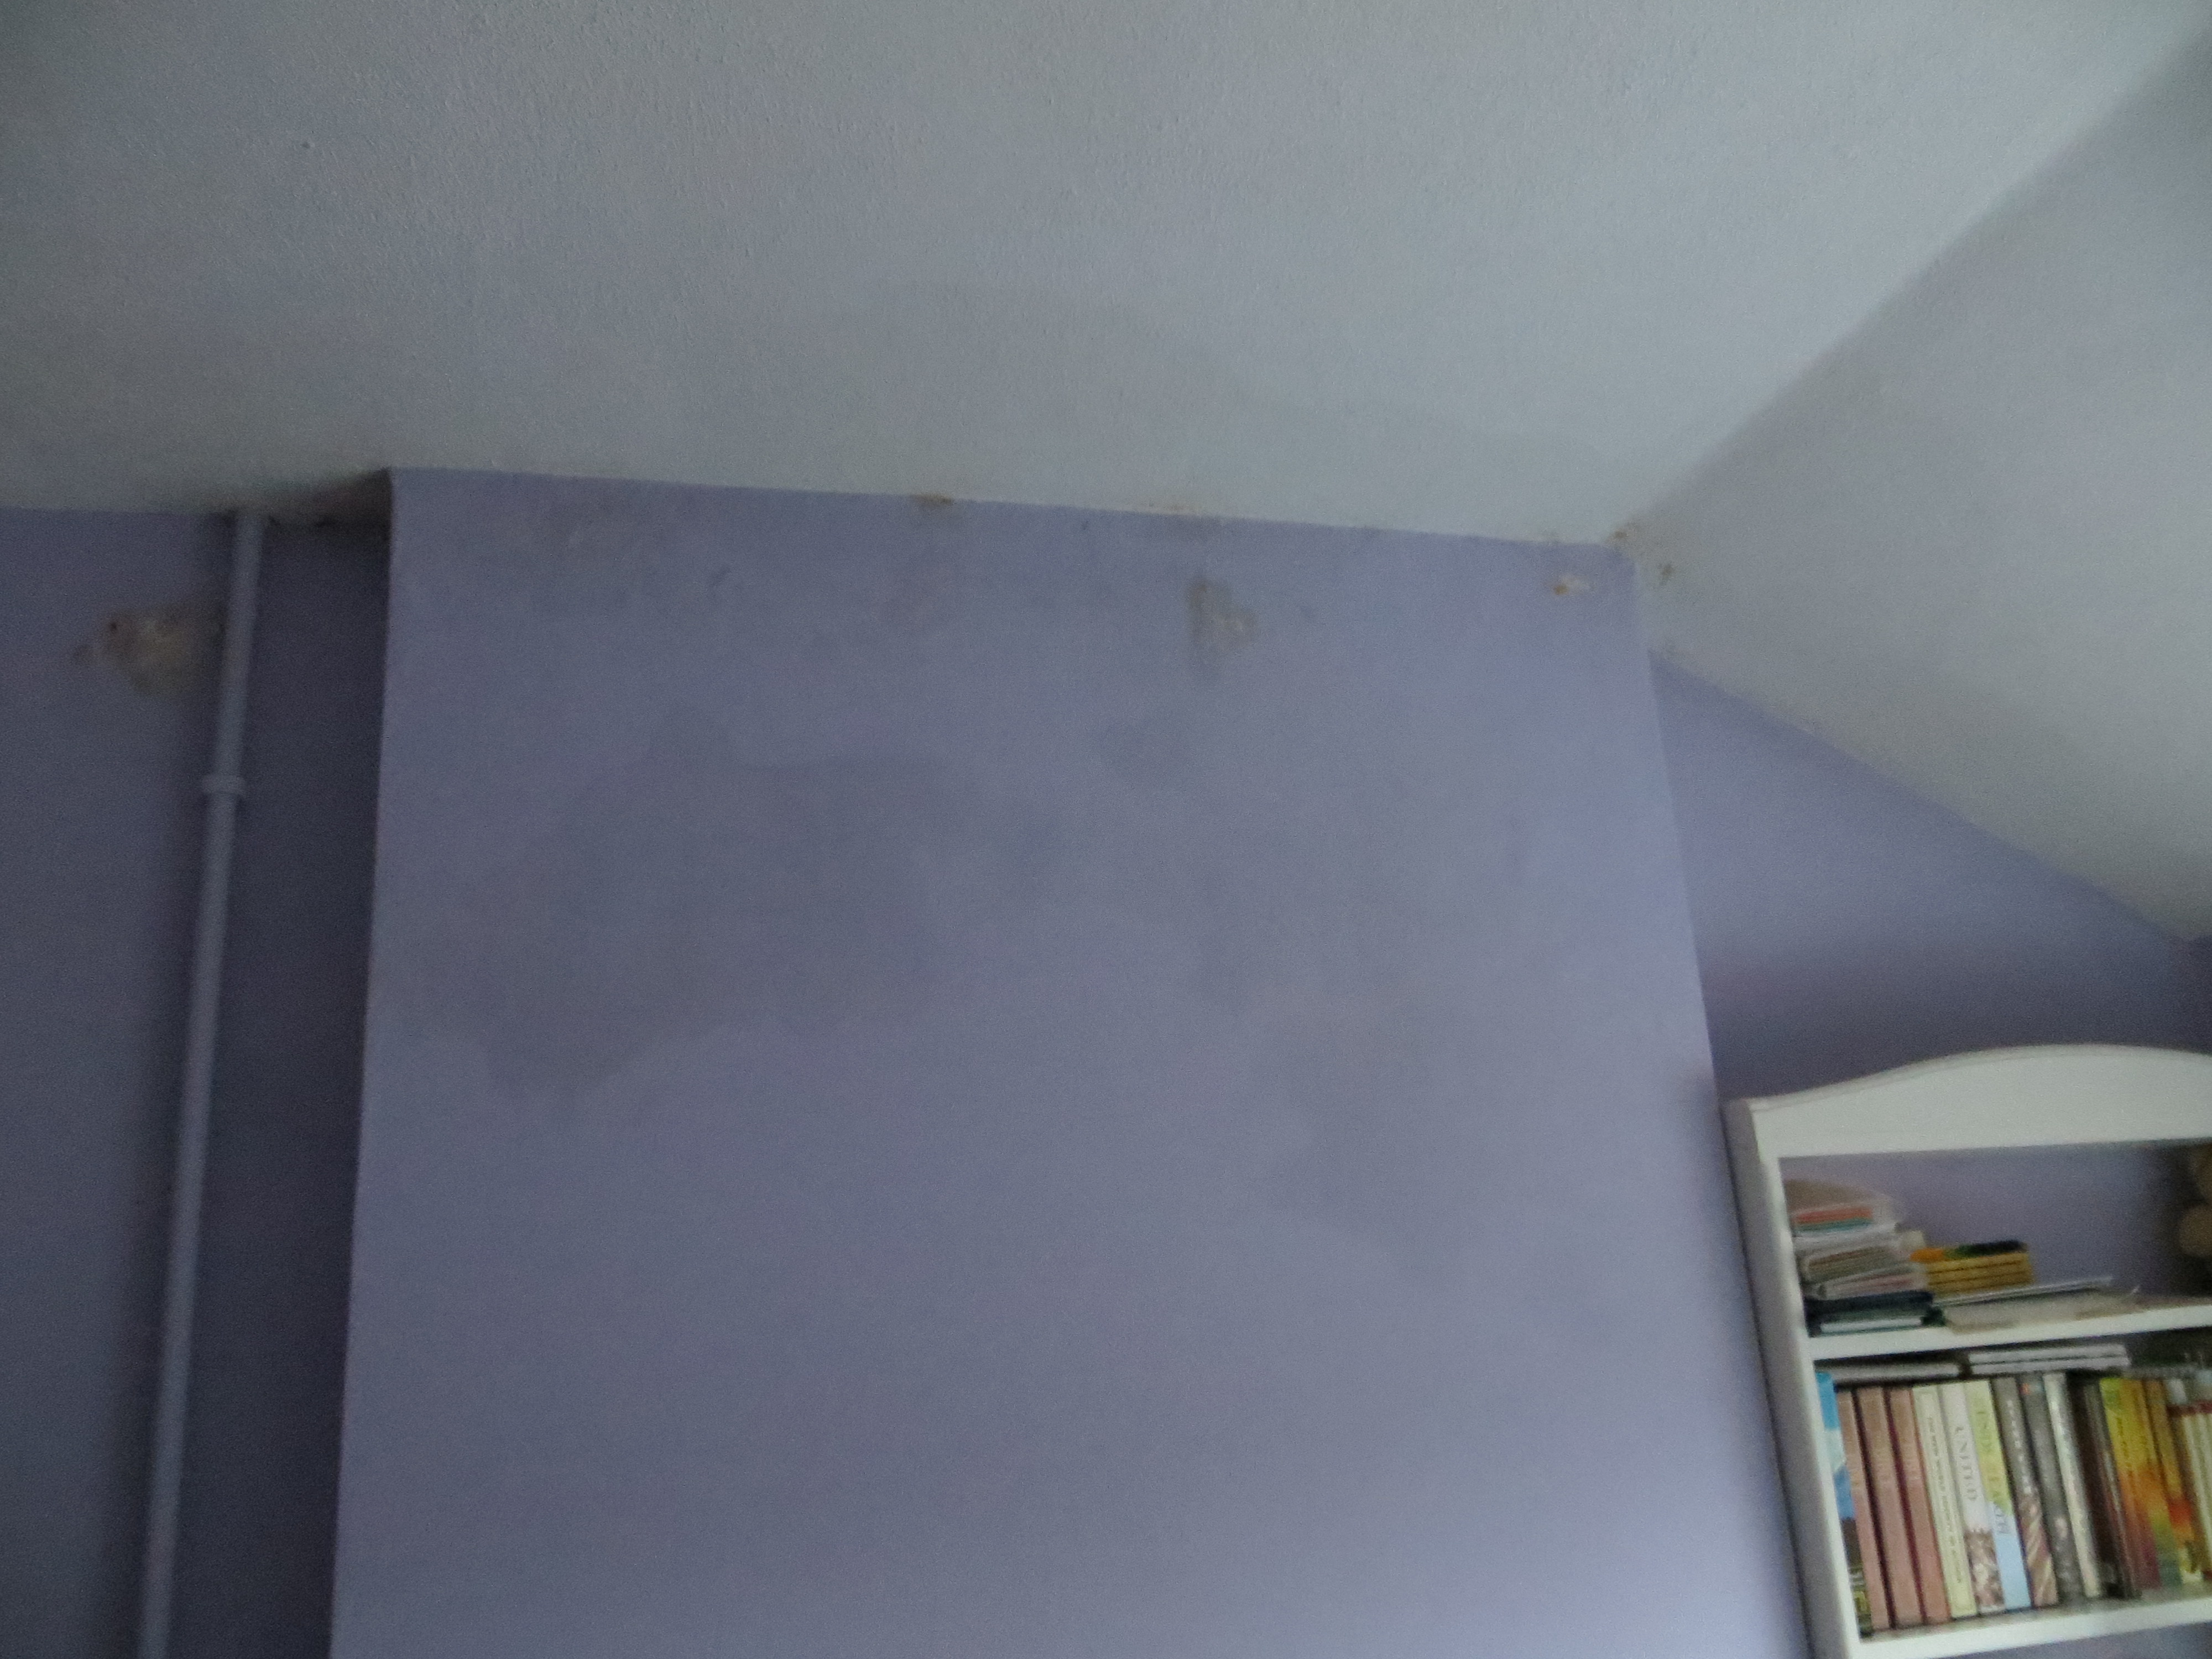 Damp Patch Stain On The Chimney Breast